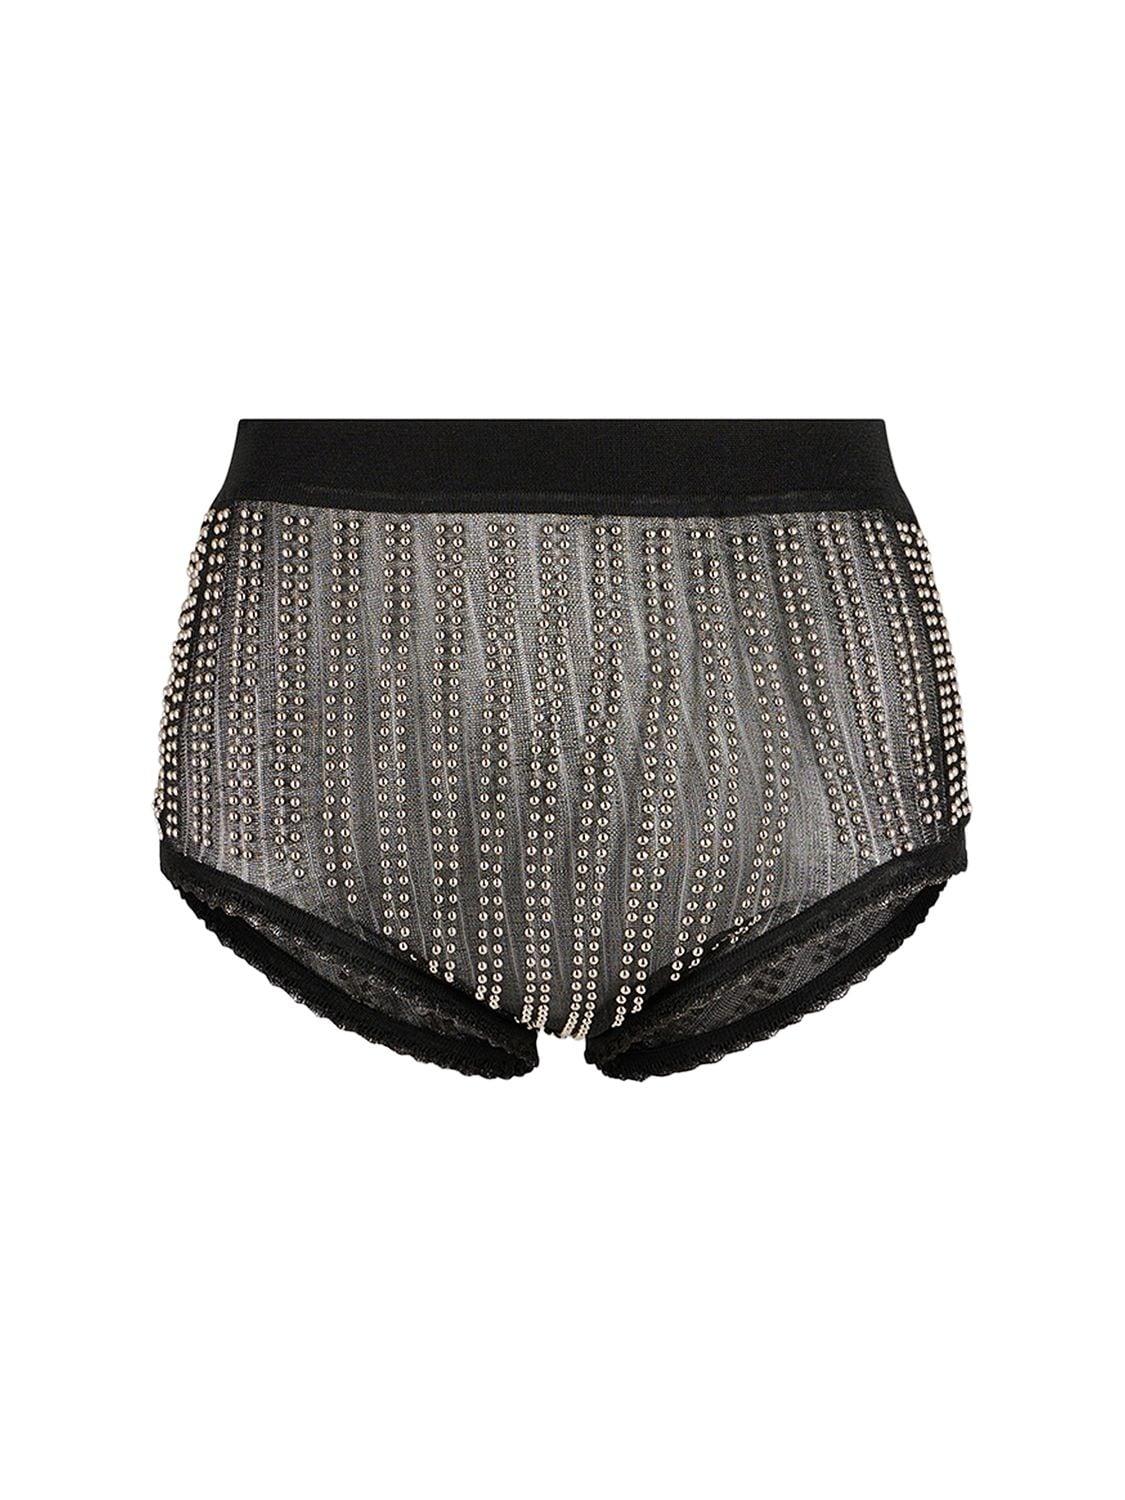 PACO RABANNE SHEER KNIT STUDDED HIGH BRIEFS